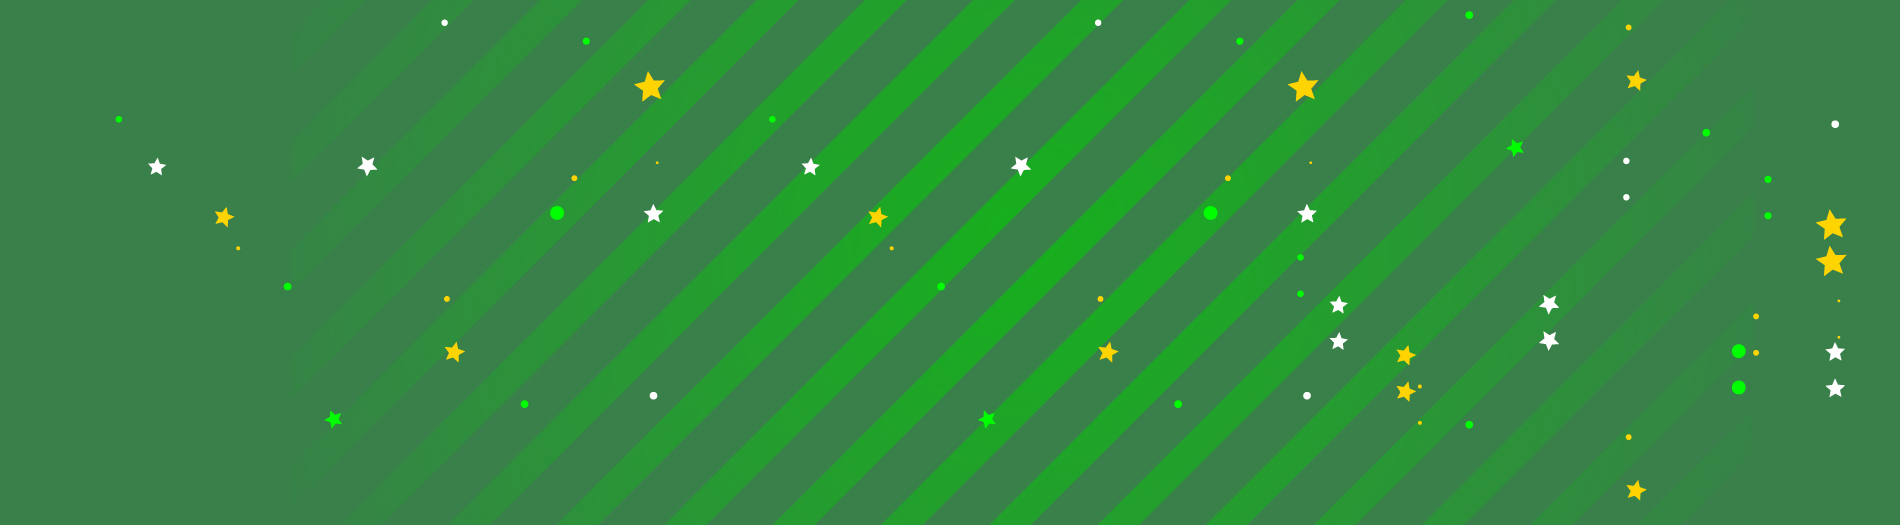 A green color field with stripes and falling snowflakes on it.